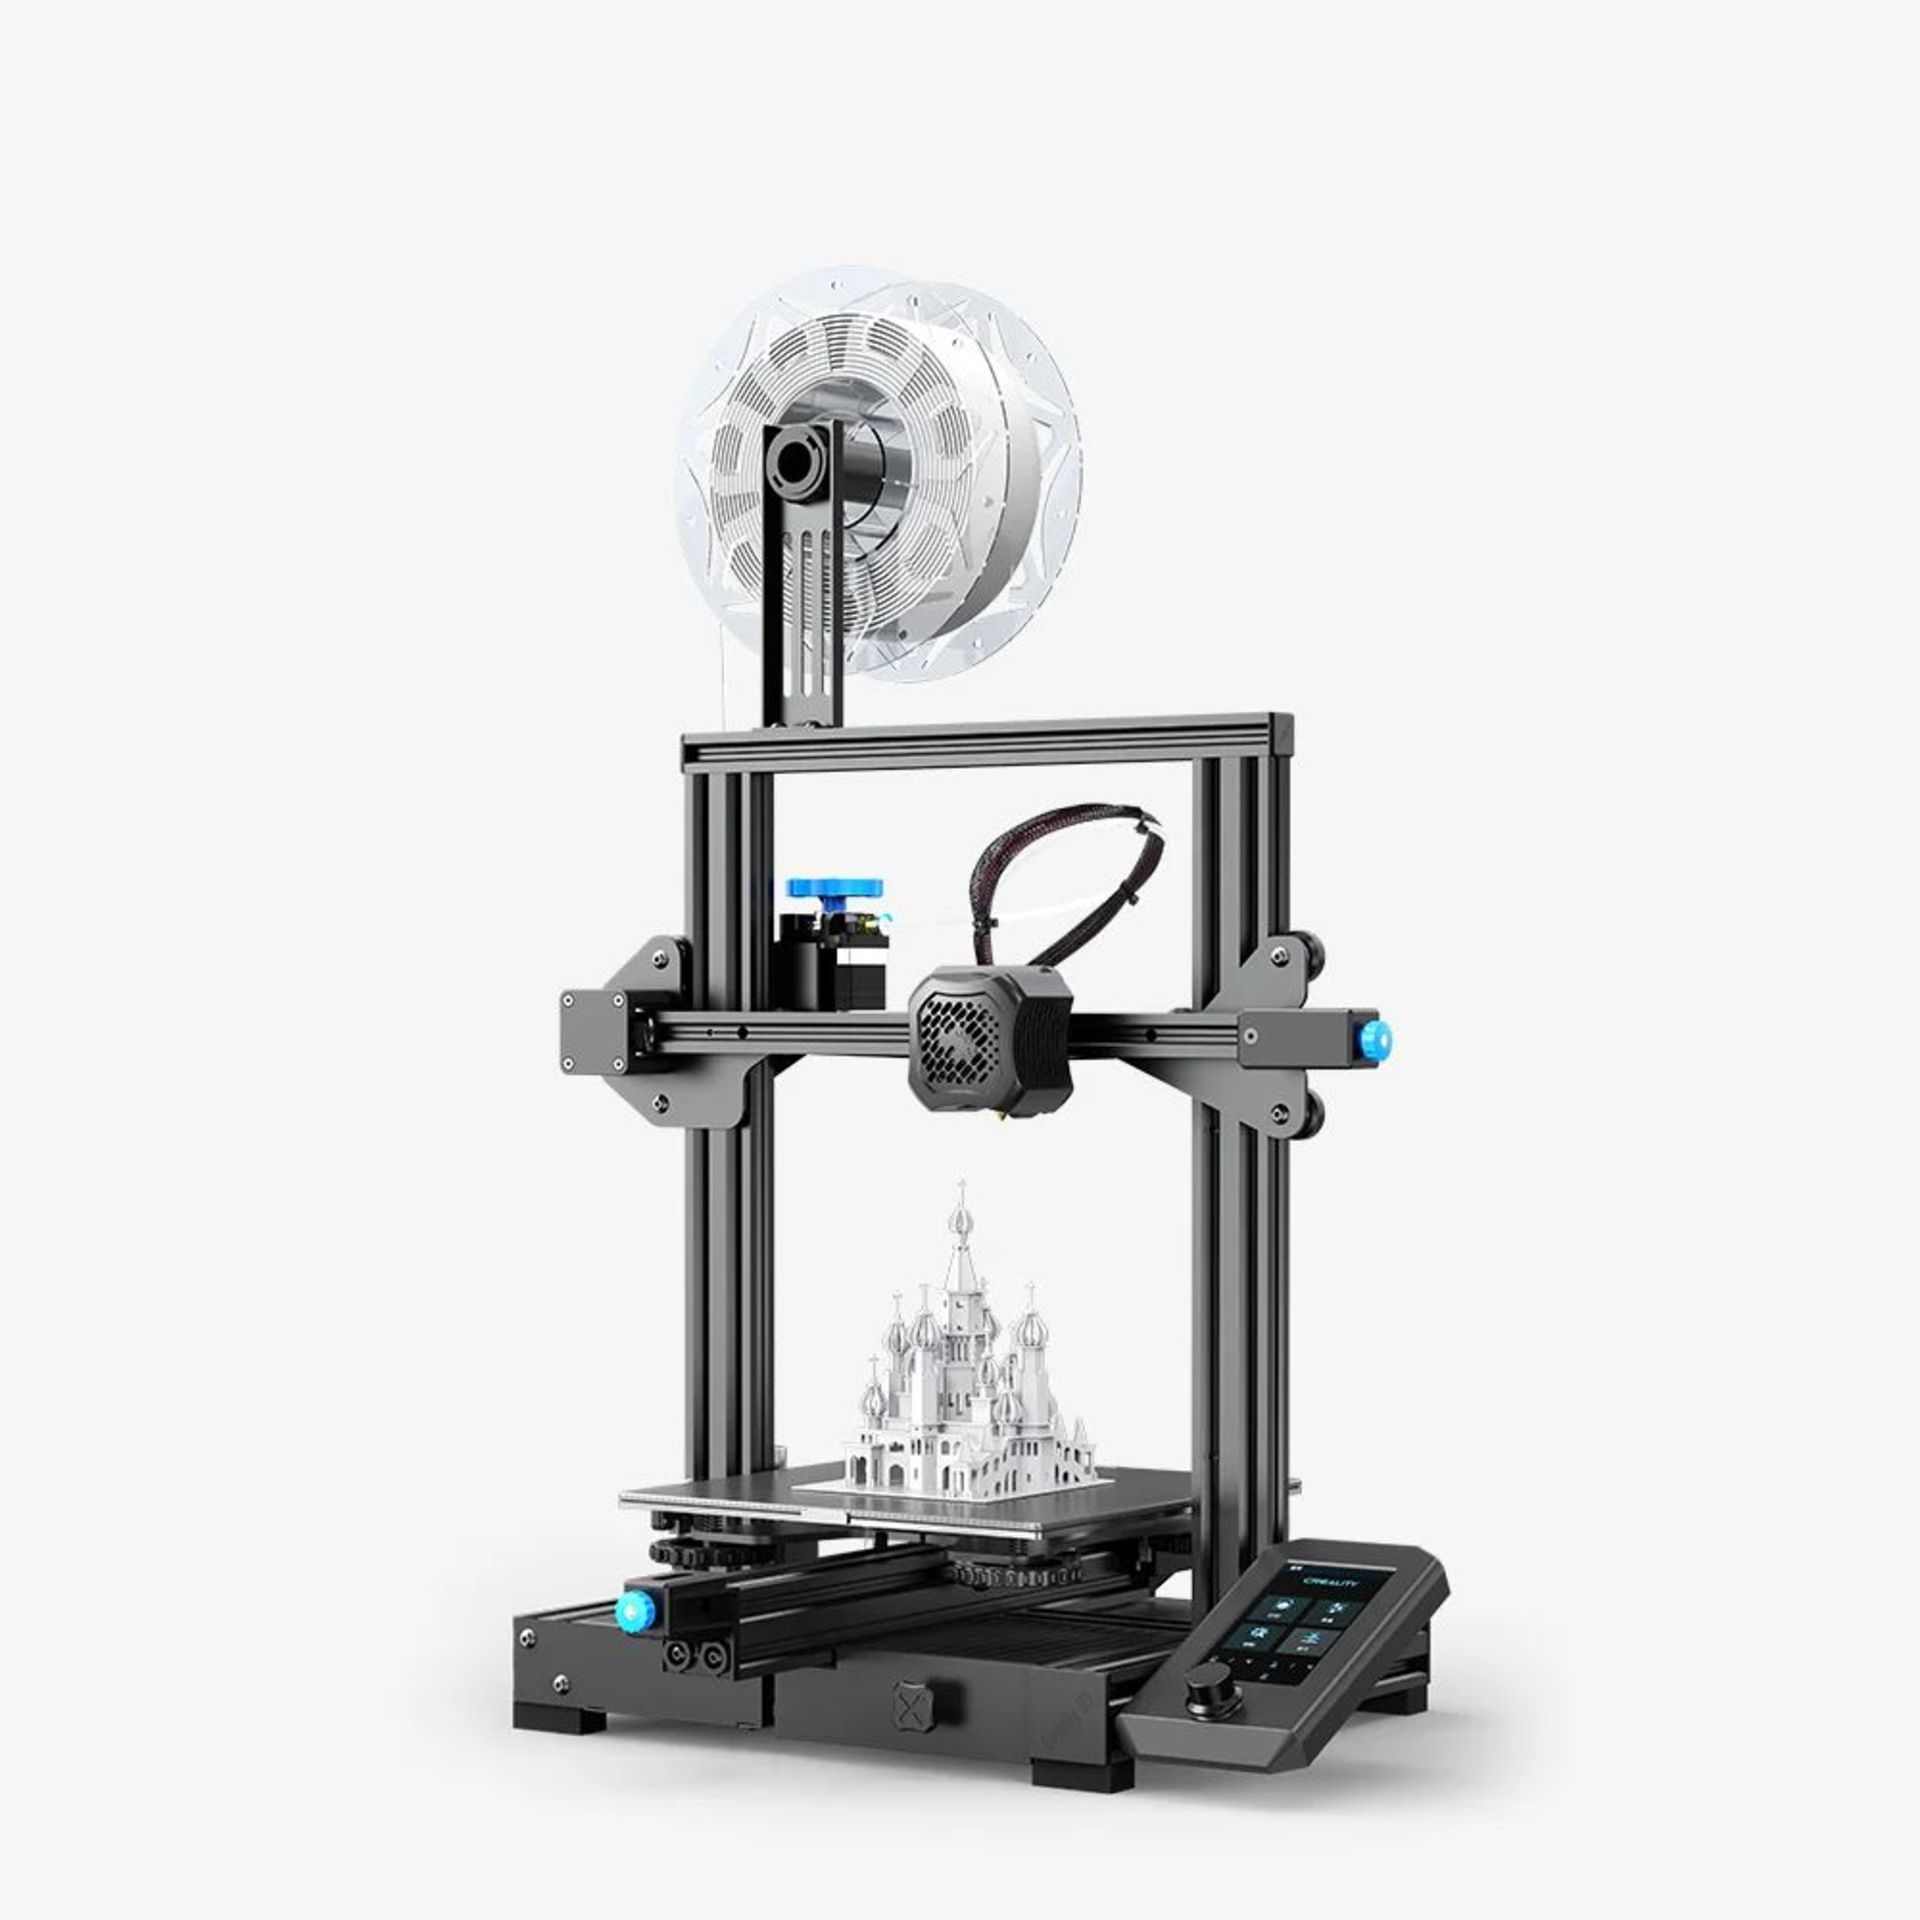 Creality Ender-3 V2 3D Printer. - PCKBW. RRP £319.00. 4.3-inch HD color screen for new UI